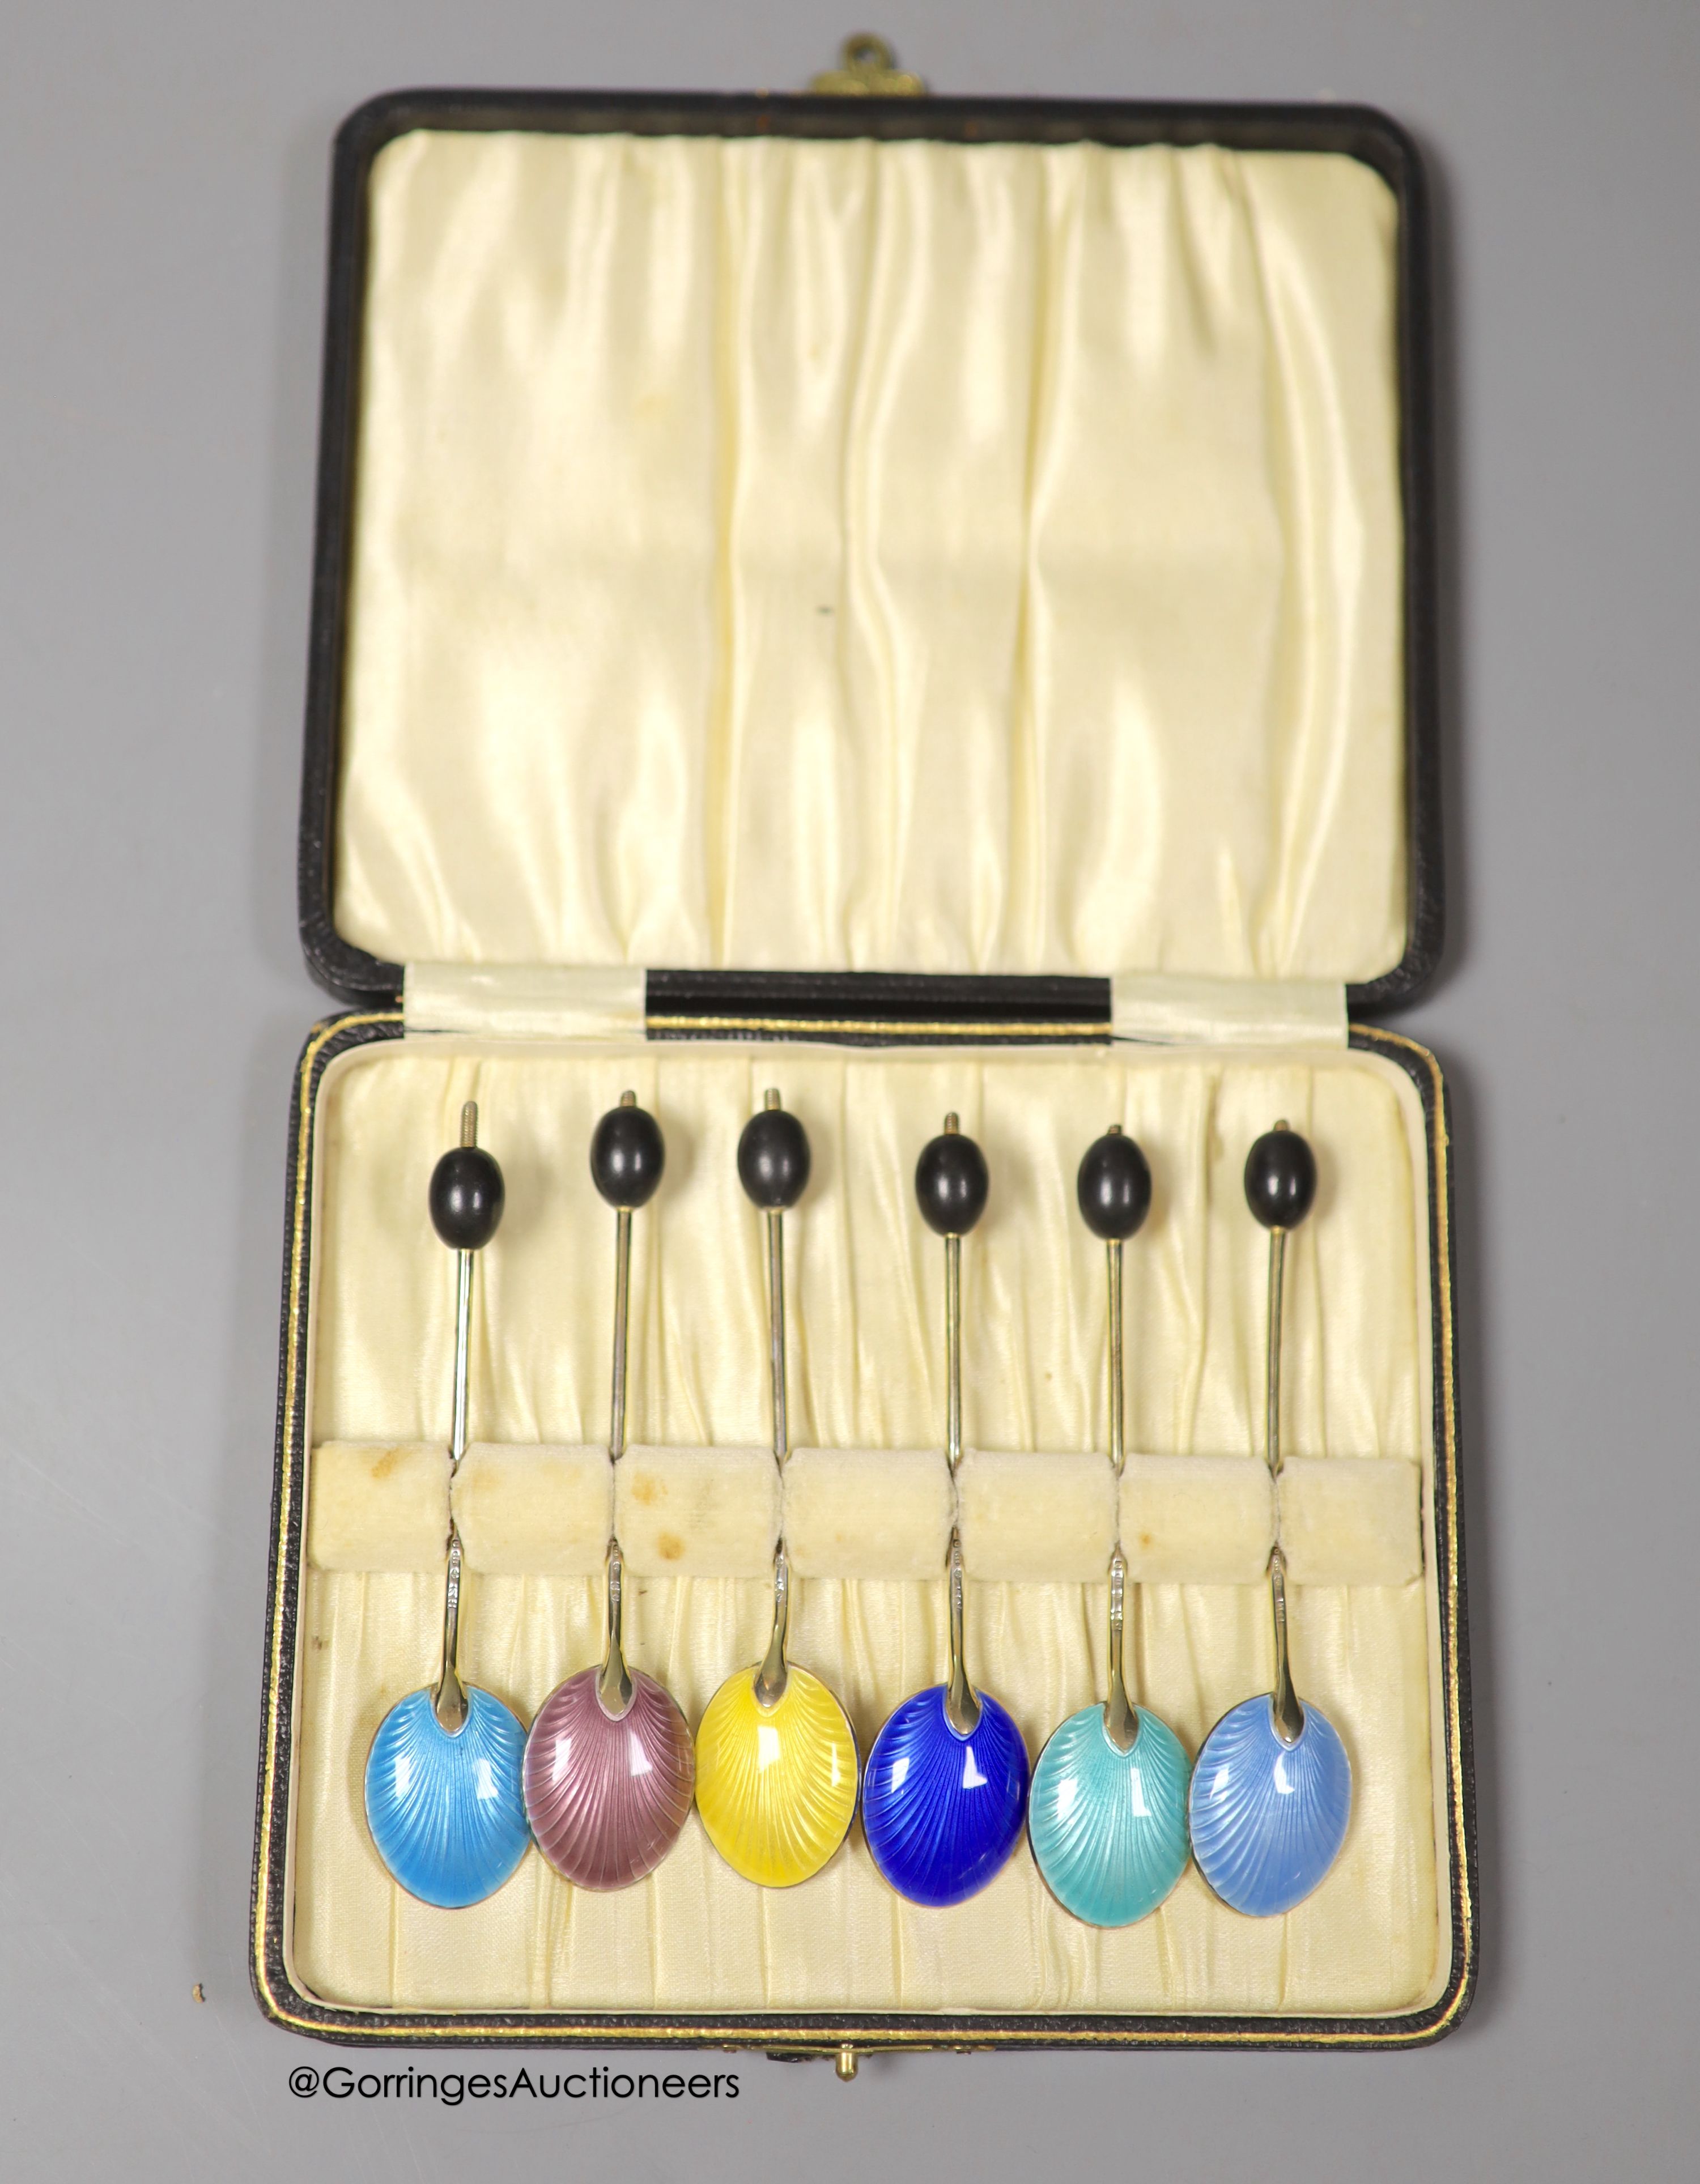 A late 1920's cased set of six continental silver and enamel bean end coffee spoons, import marks for George Stockwell, London, 1929, 9.9cm.